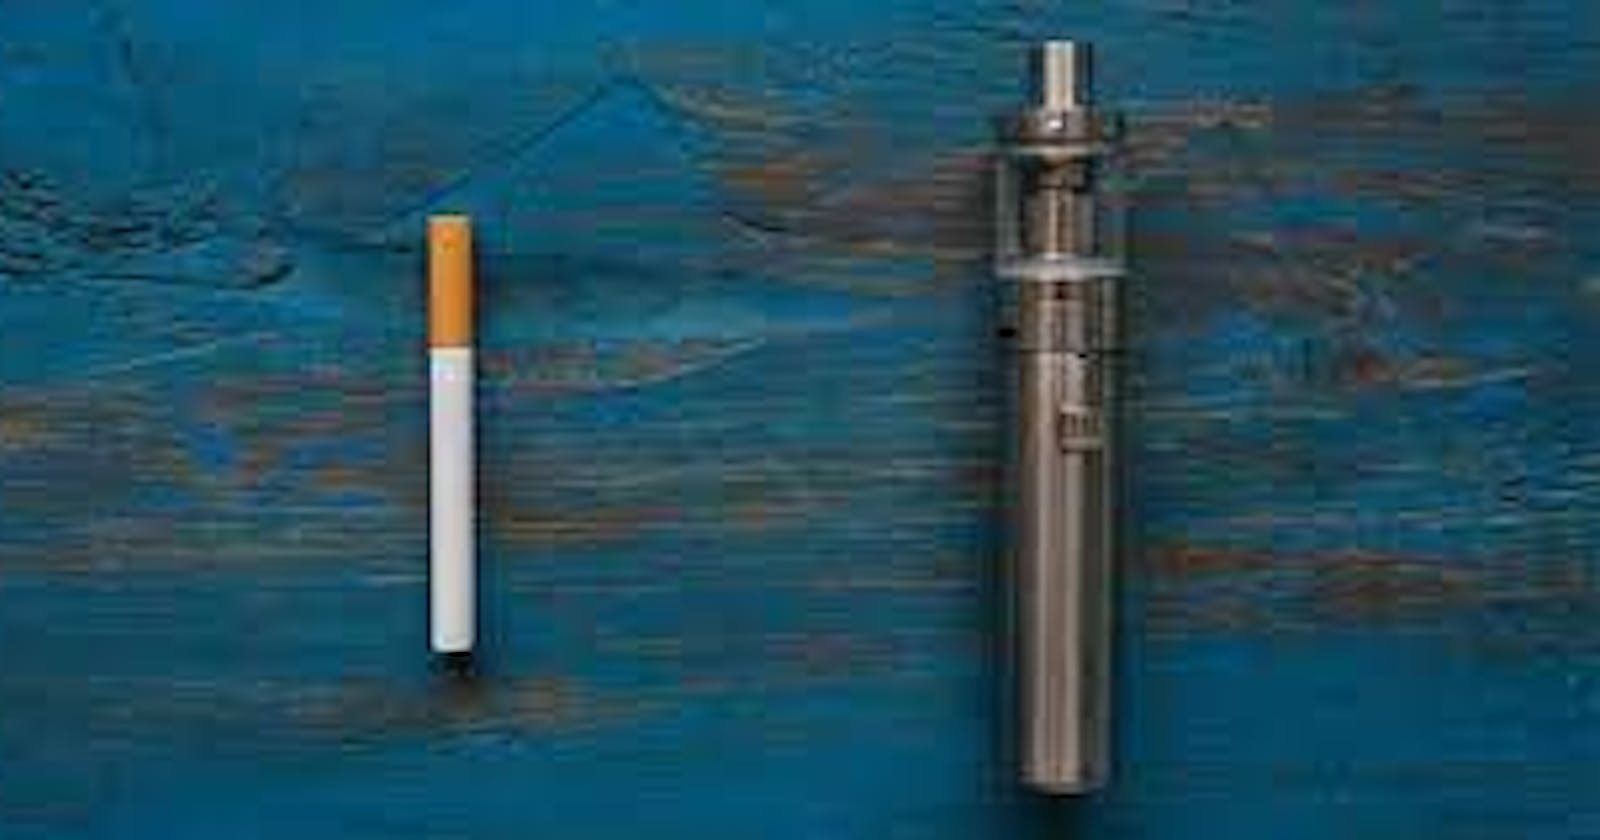 Online, you get a lot of benefits when you buy e-cigarettes, like saving money and time.